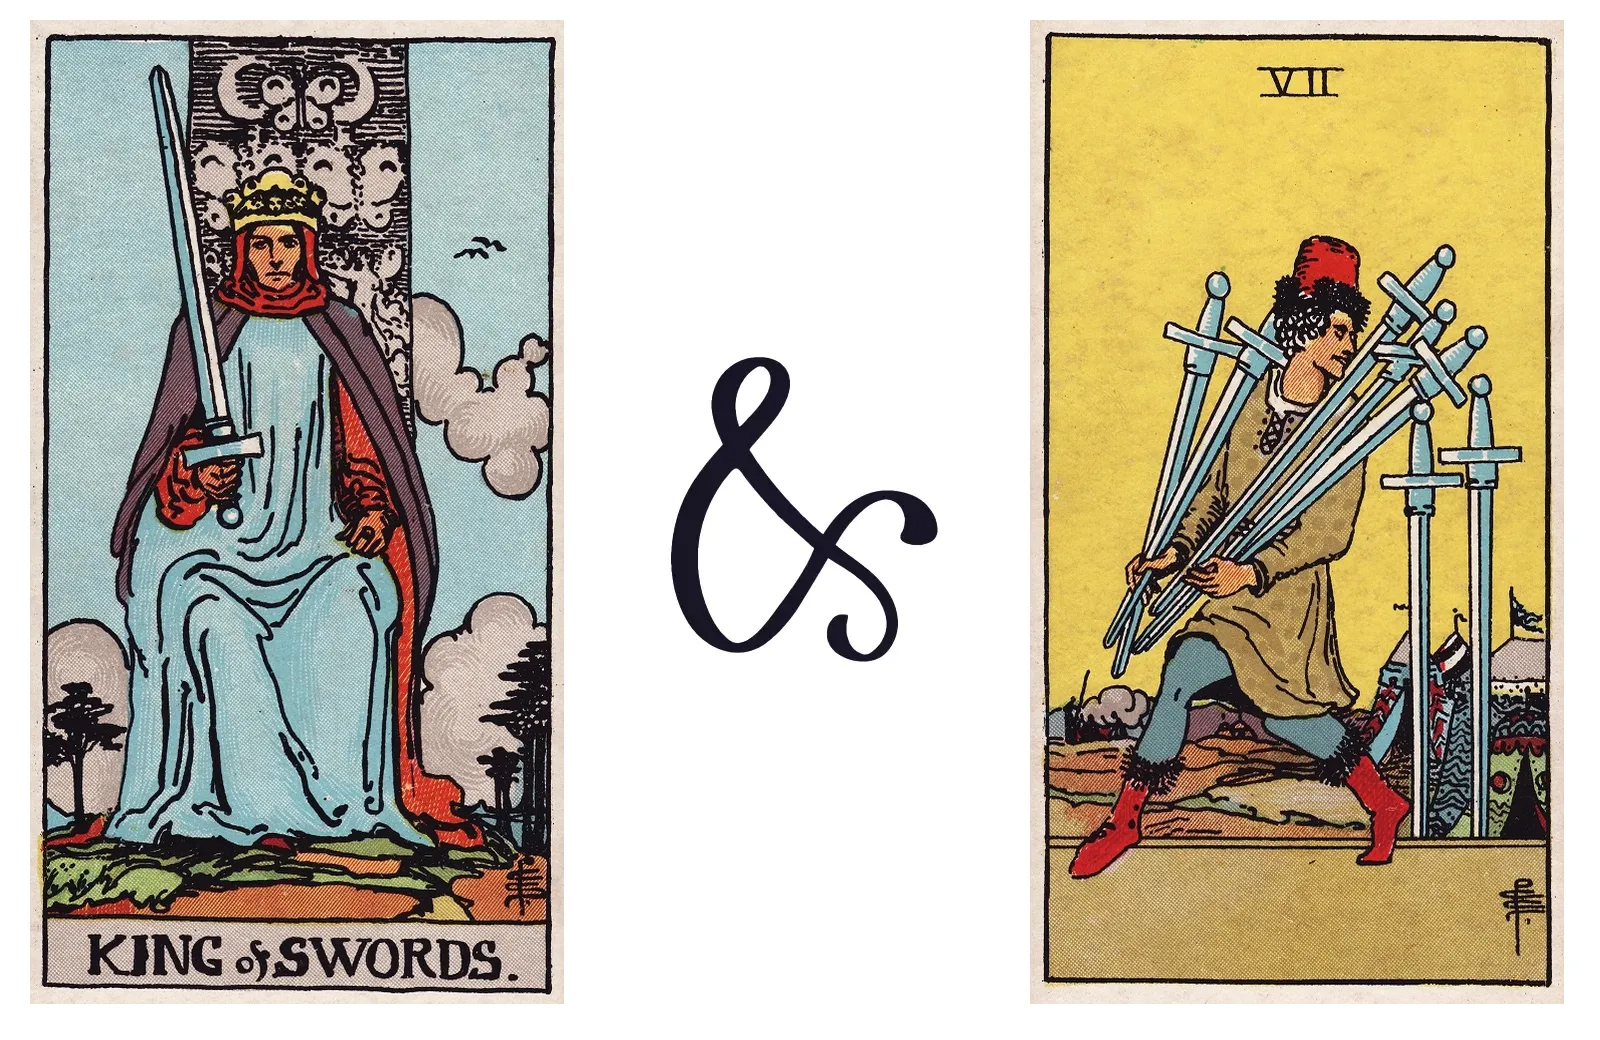 King of Swords and Seven of Swords